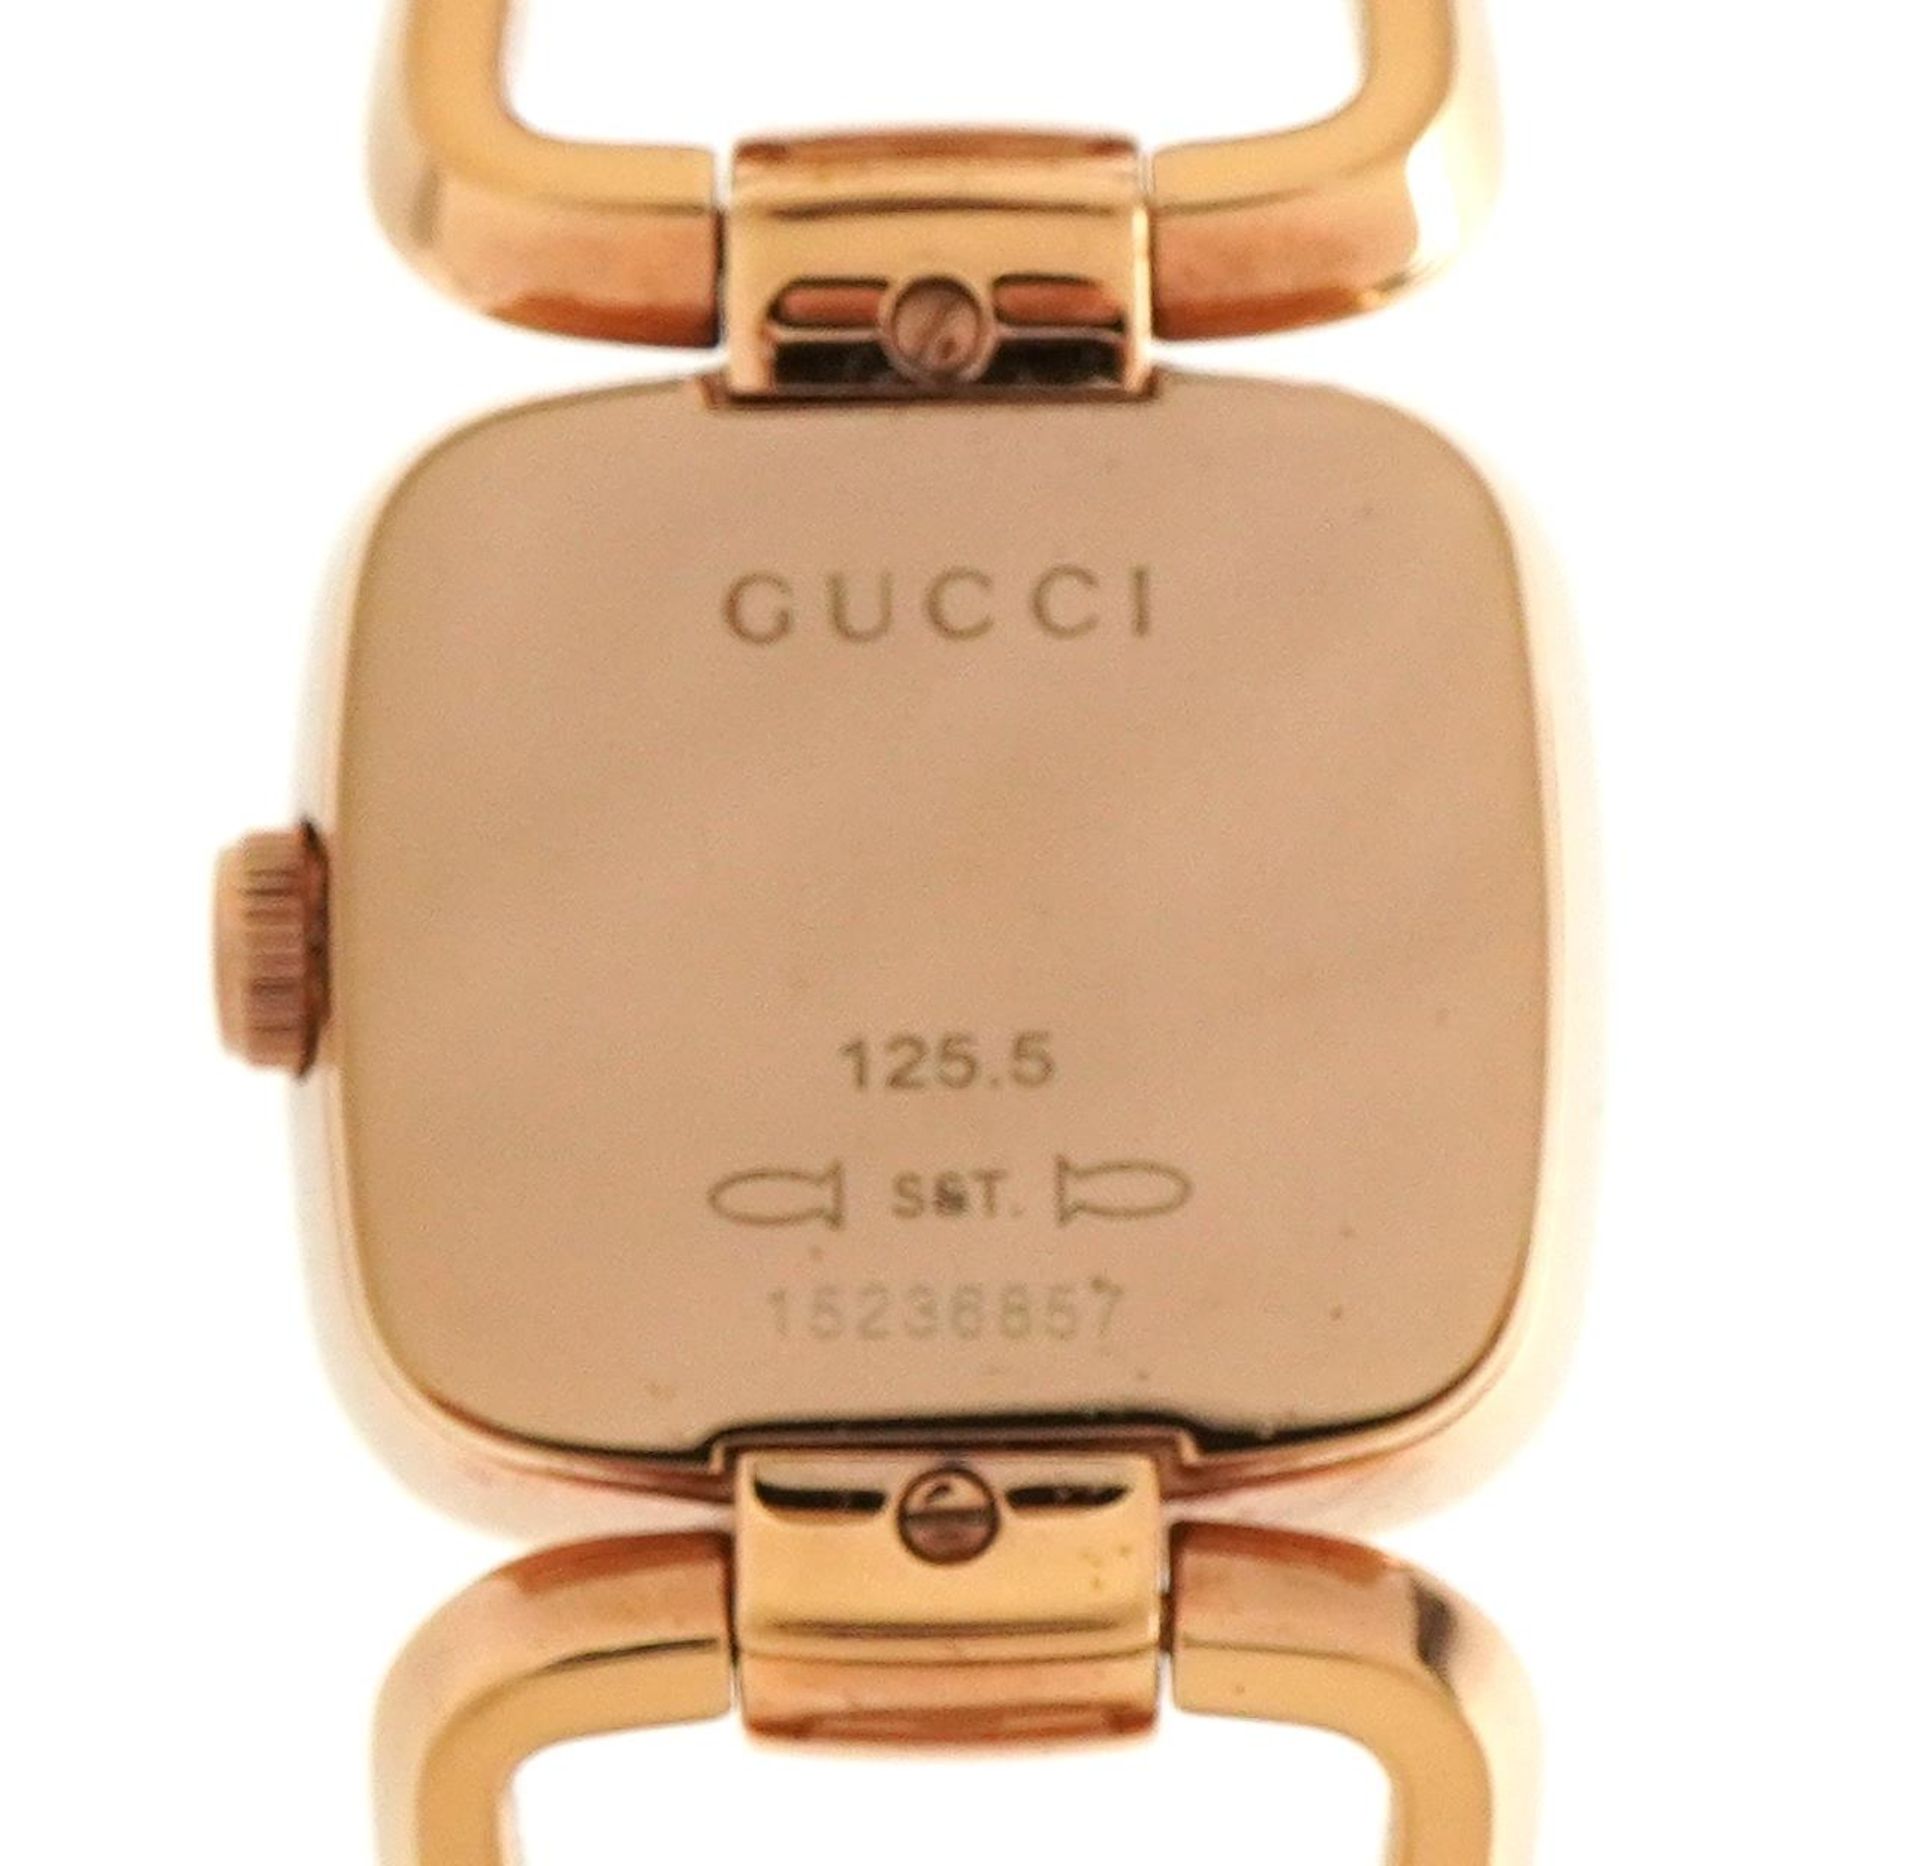 Gucci, ladies Gucci Dial G wristwatch numbered 125.5 with spare link and box, the case 24mm wide - Image 4 of 8